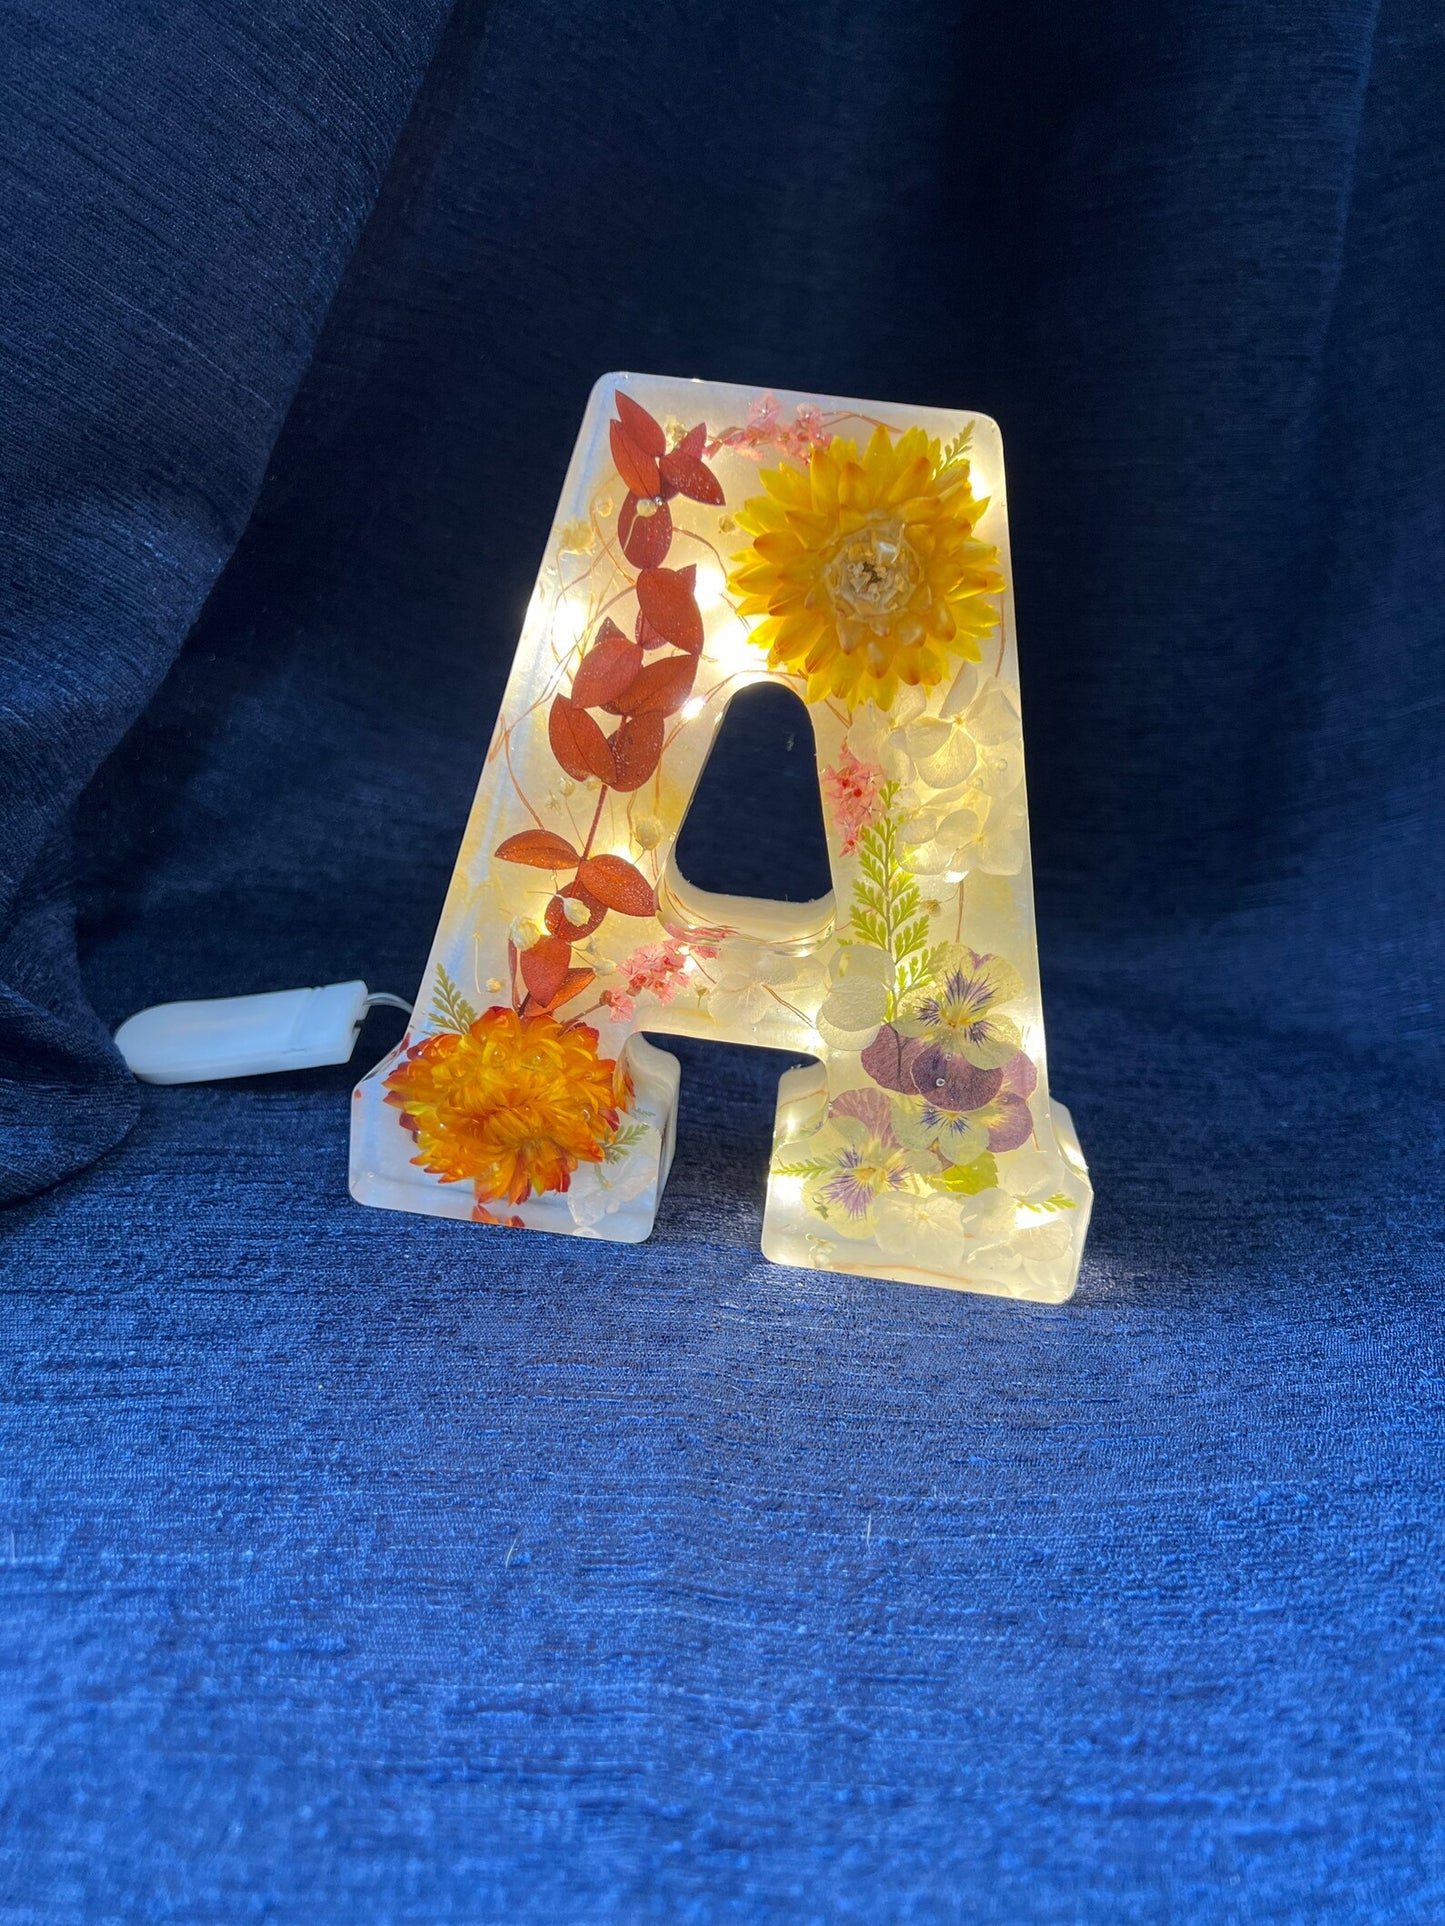 Personalized Resin Letters with Real Flowers and Fairy Lights - Made to Order